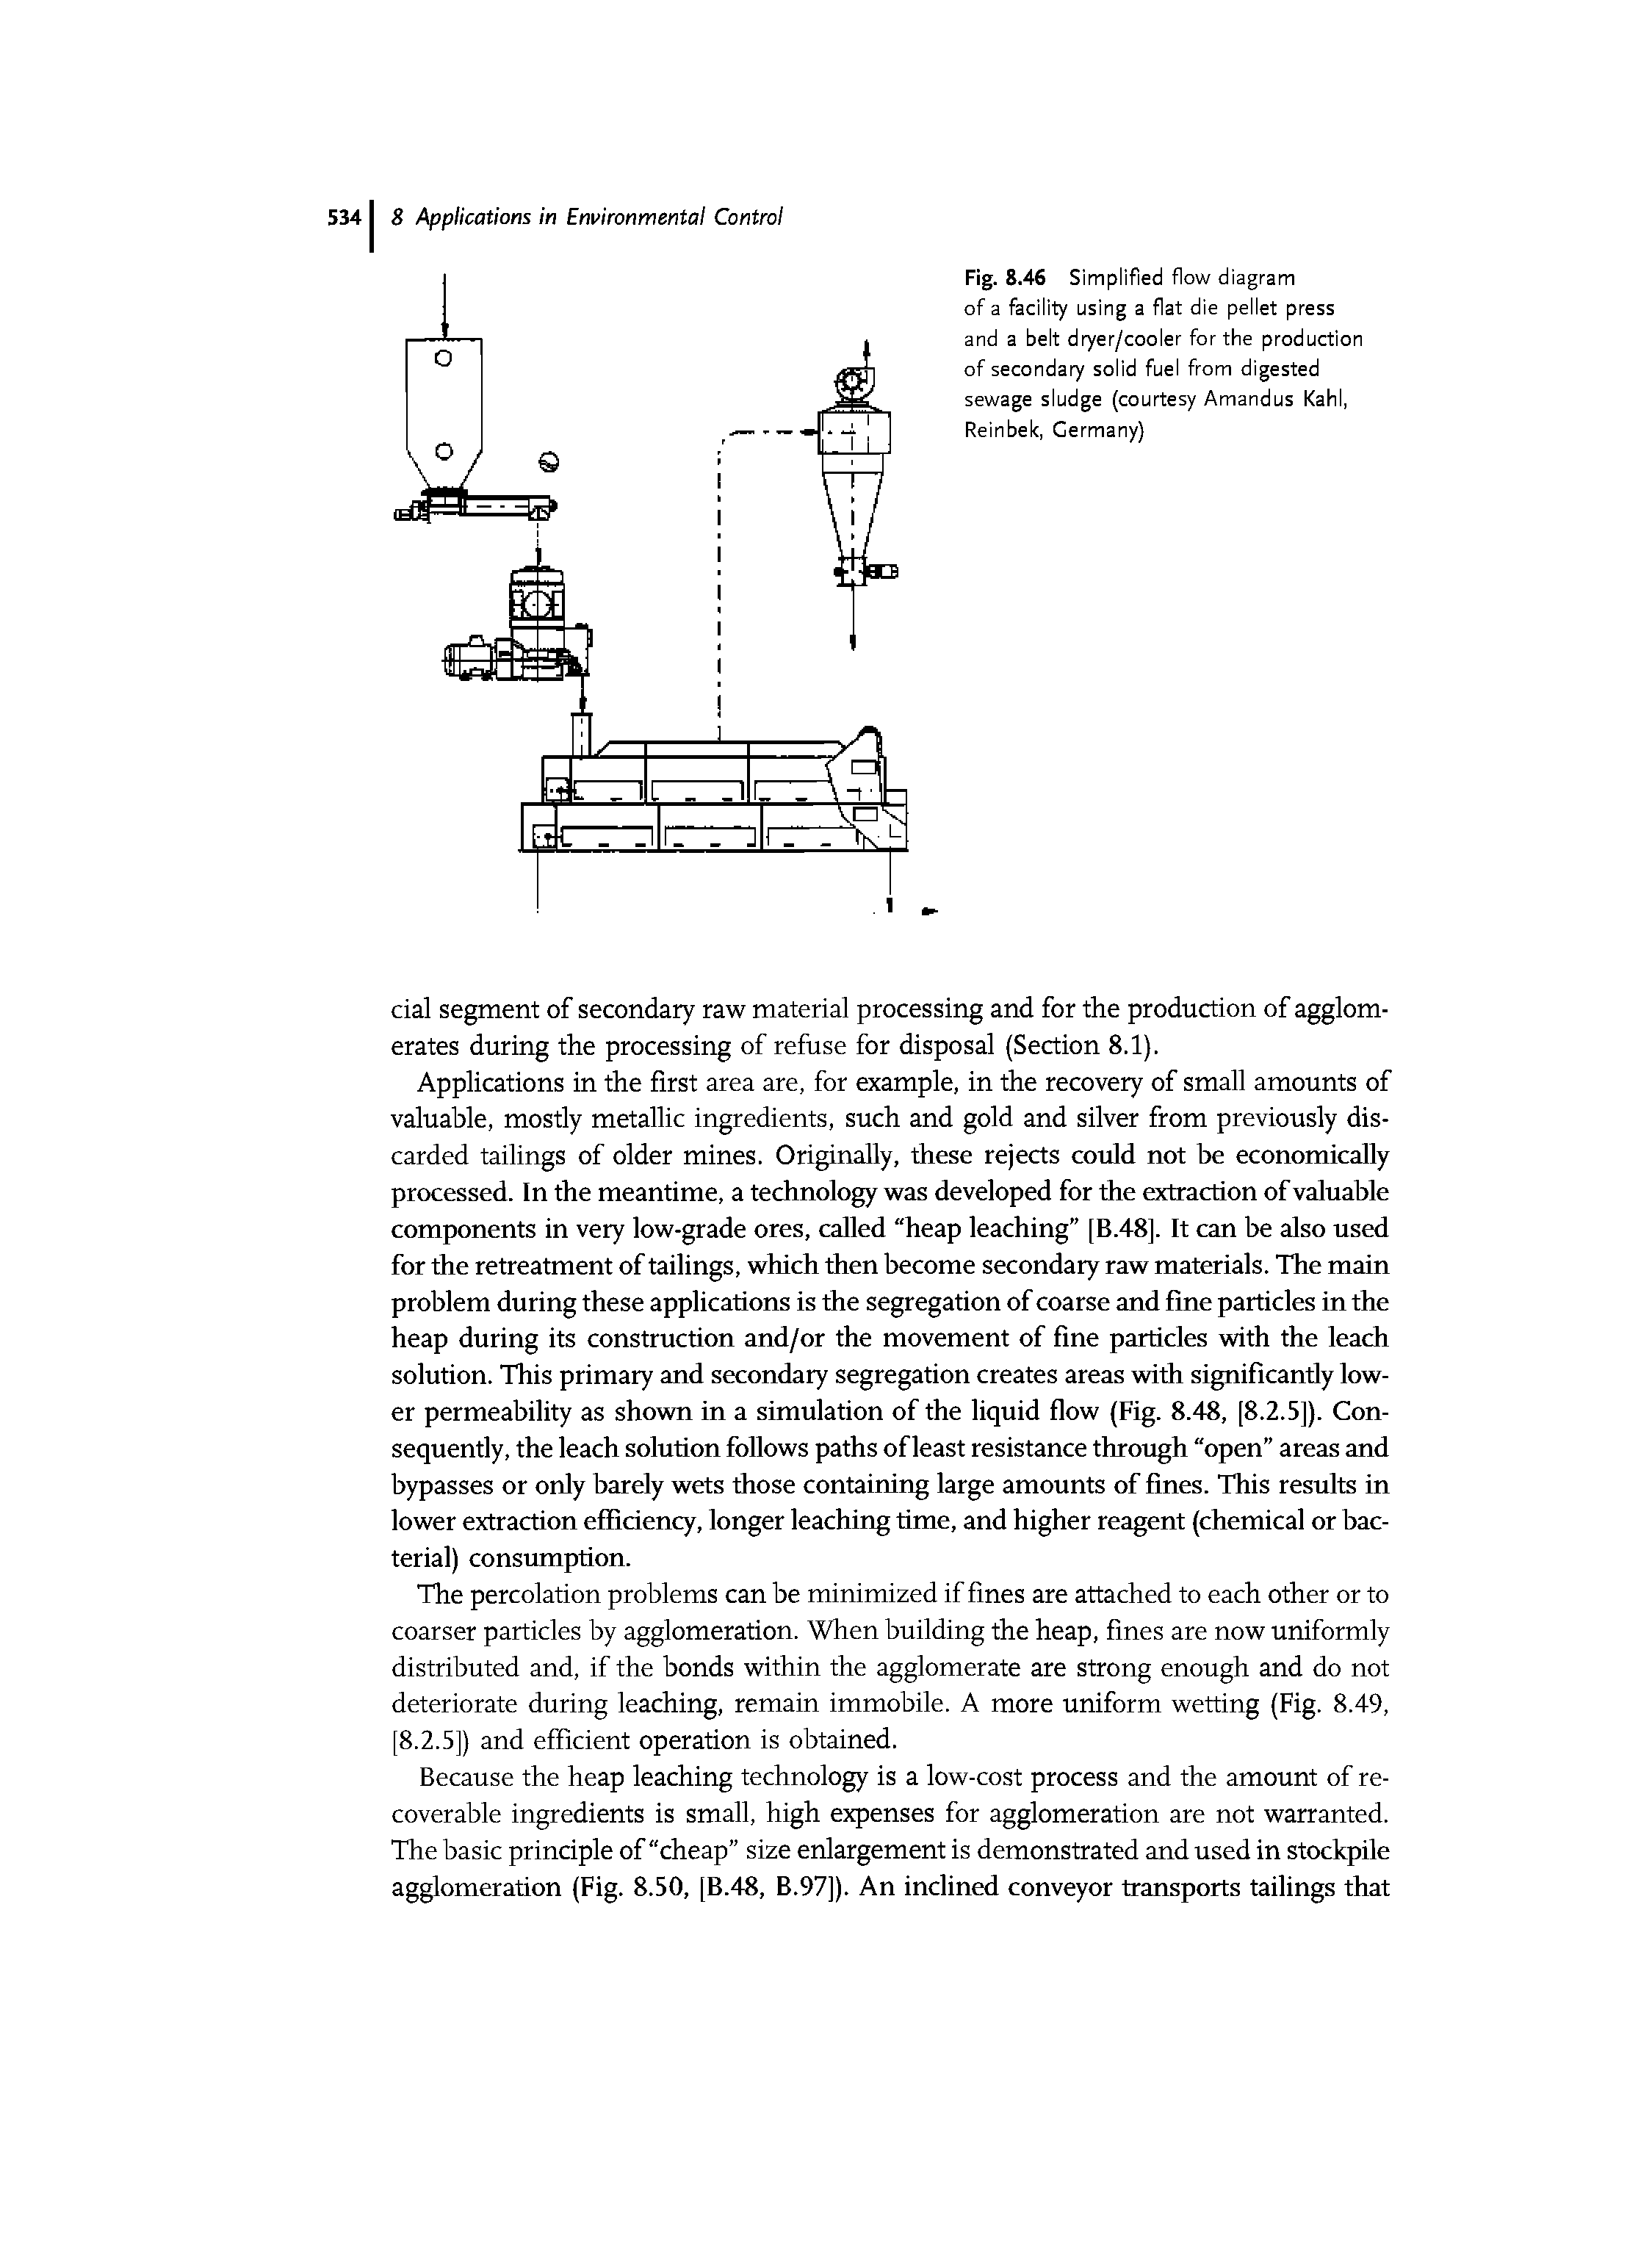 Fig. 8.46 S implified flow diagram of a facility using a flat die pellet press and a belt d er/cooler for the production of seconda solid fuel from digested sewage sludge (courtesy Amandus Kahl, Reinbek, Germany)...